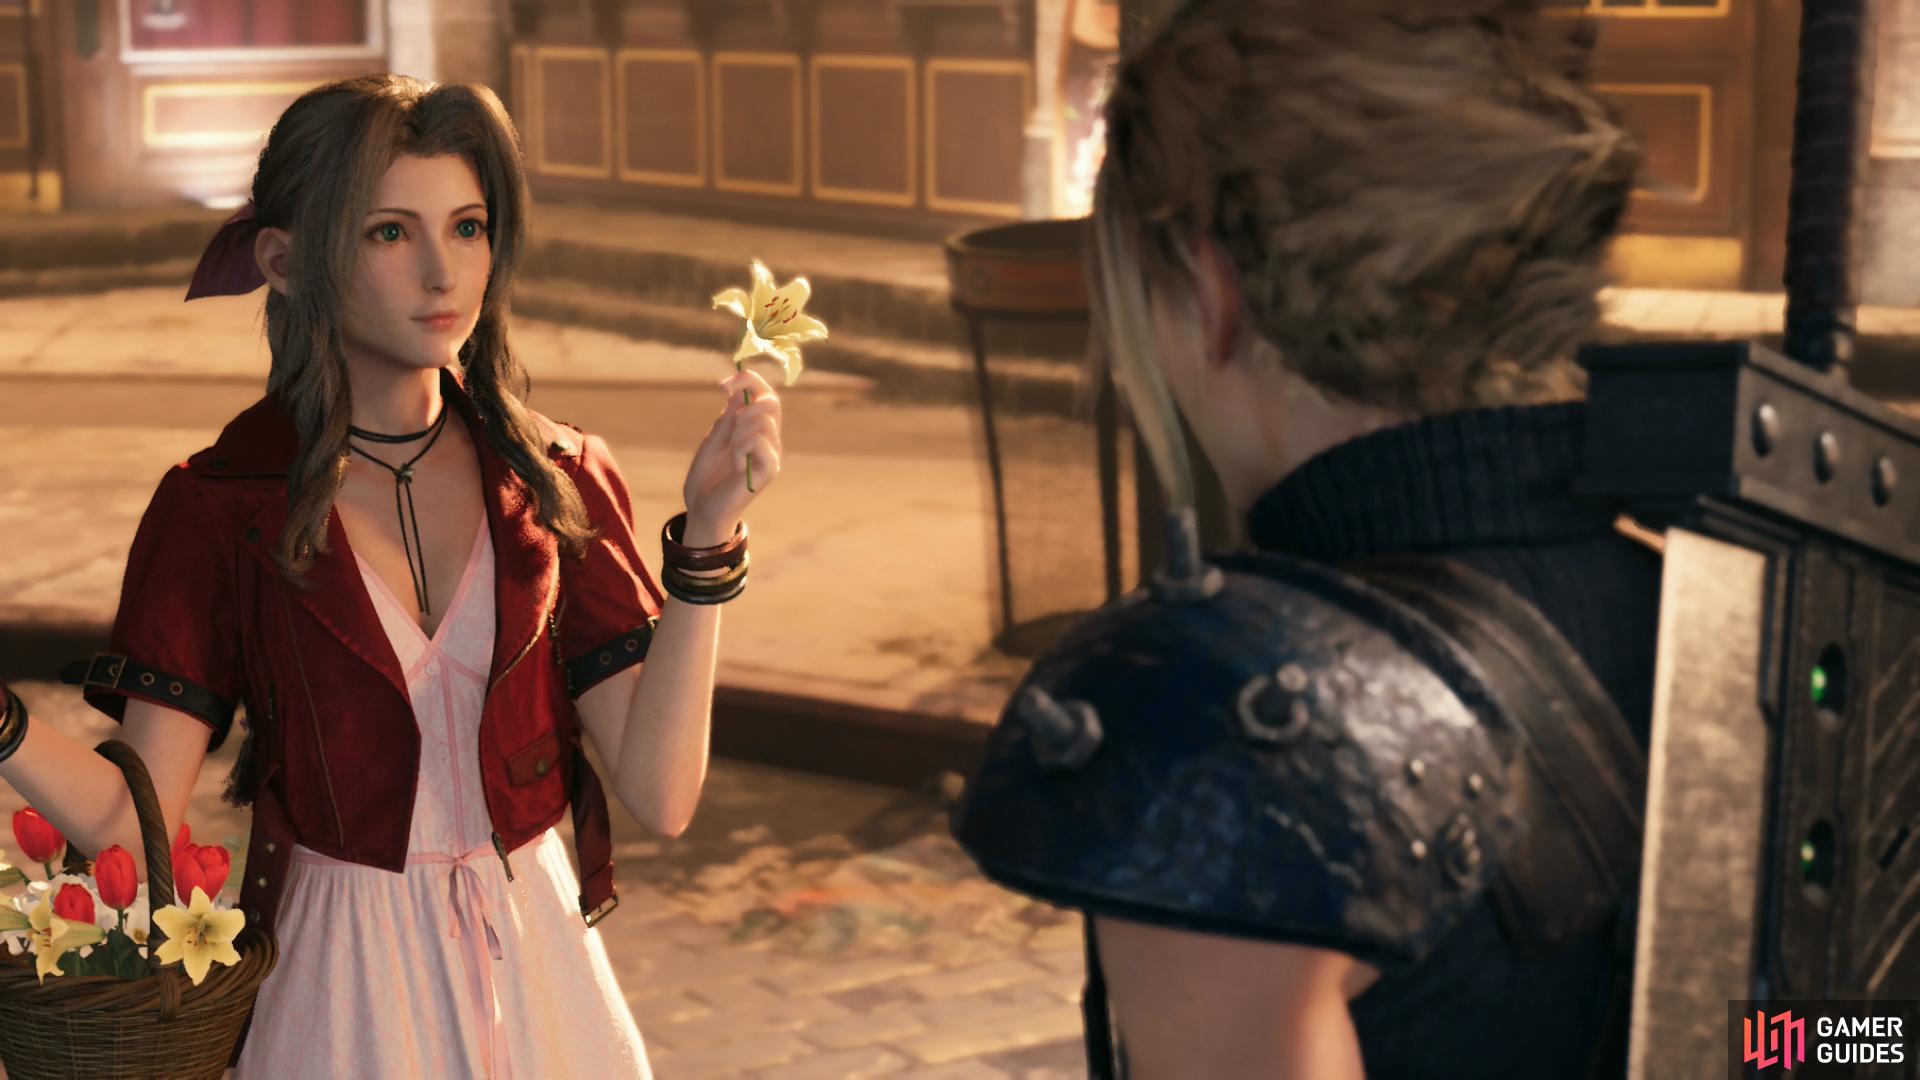 While wandering through the streets of Midgar, you'll meet Aerith.